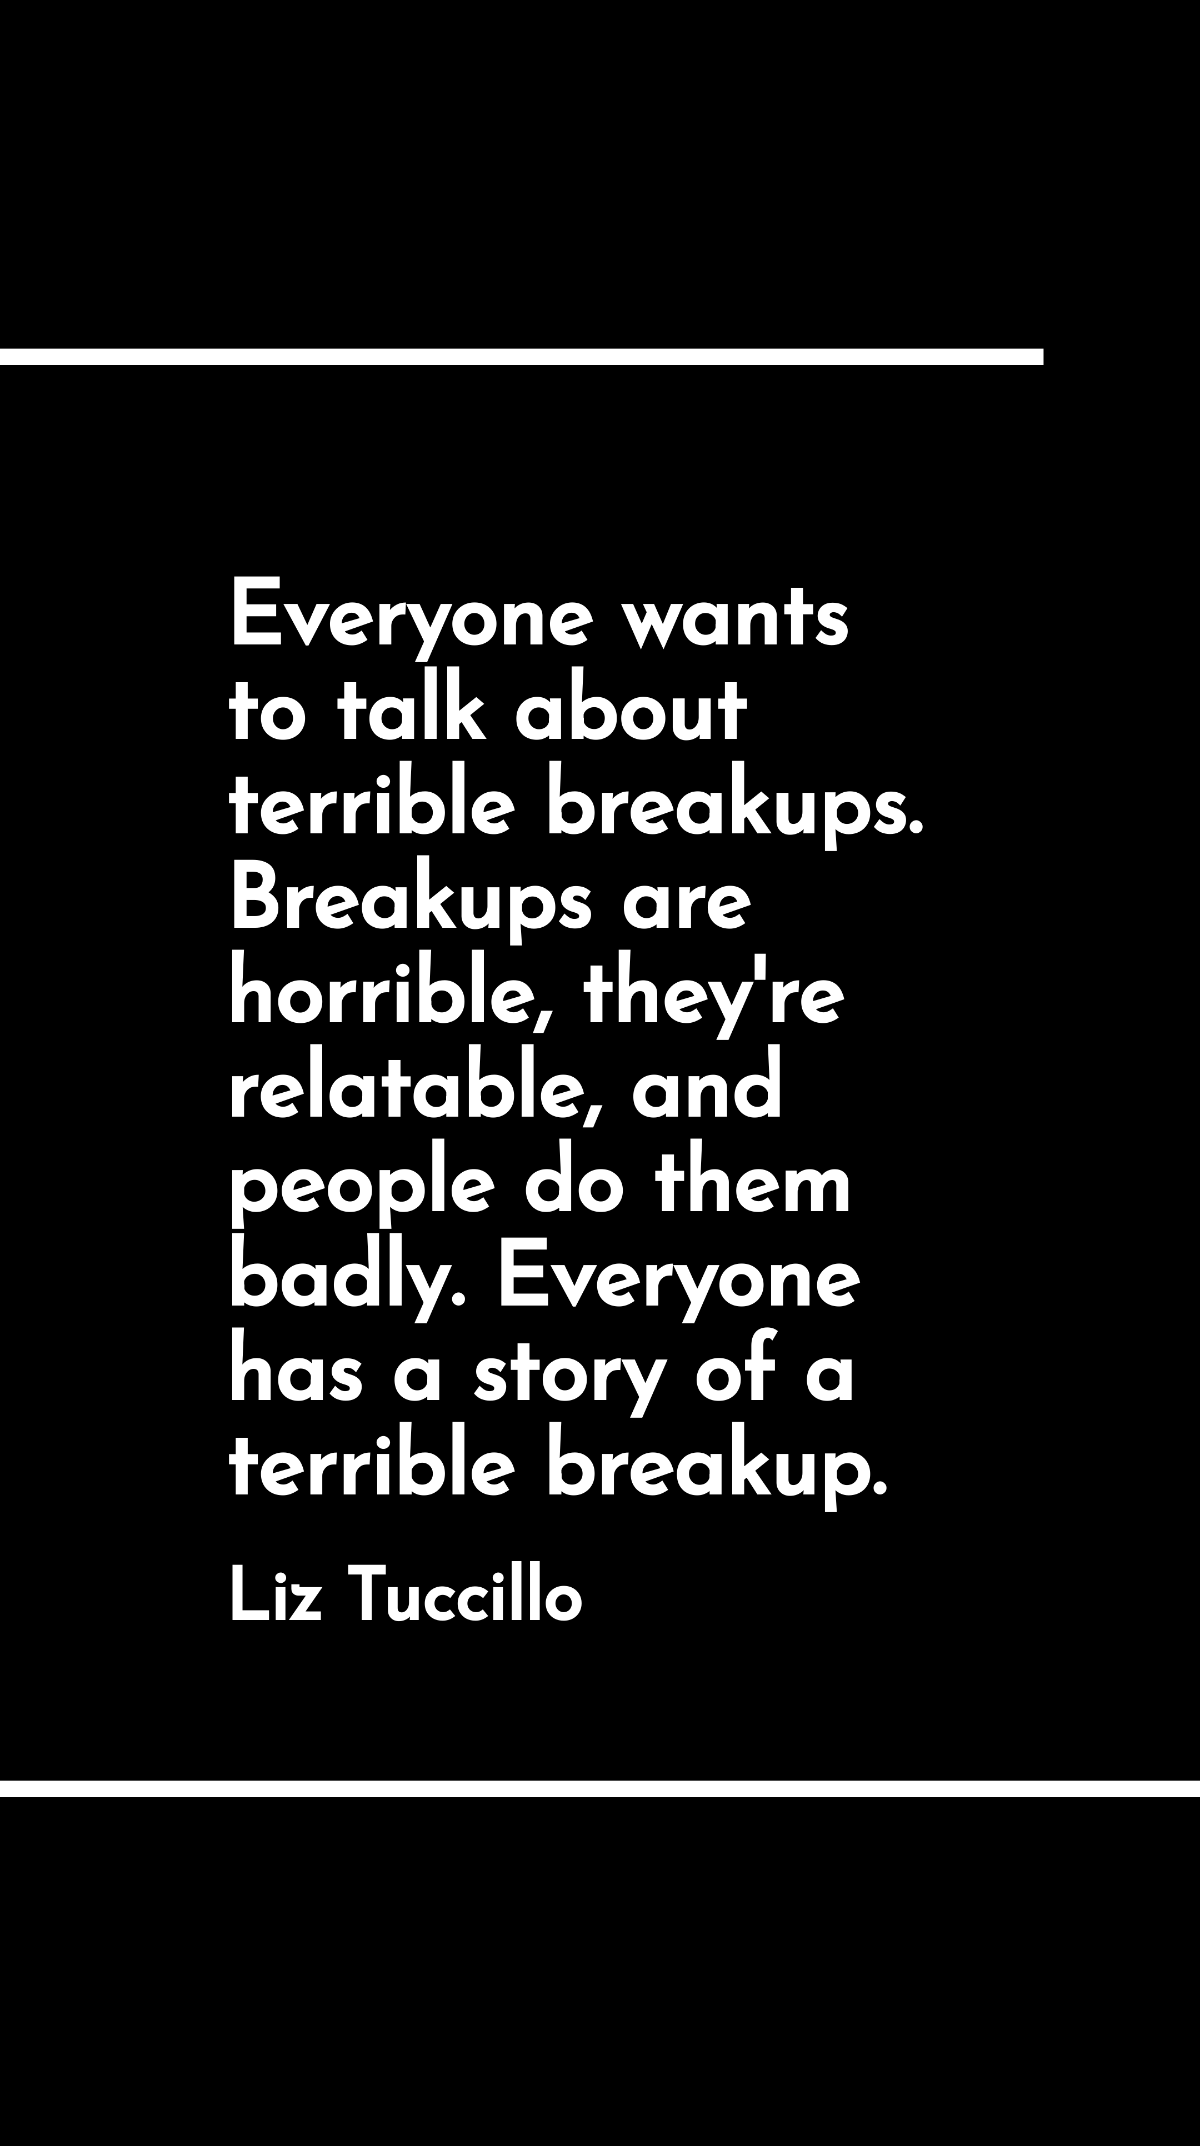 Liz Tuccillo - Everyone wants to talk about terrible breakups. Breakups are horrible, they're relatable, and people do them badly. Everyone has a story of a terrible breakup. Template